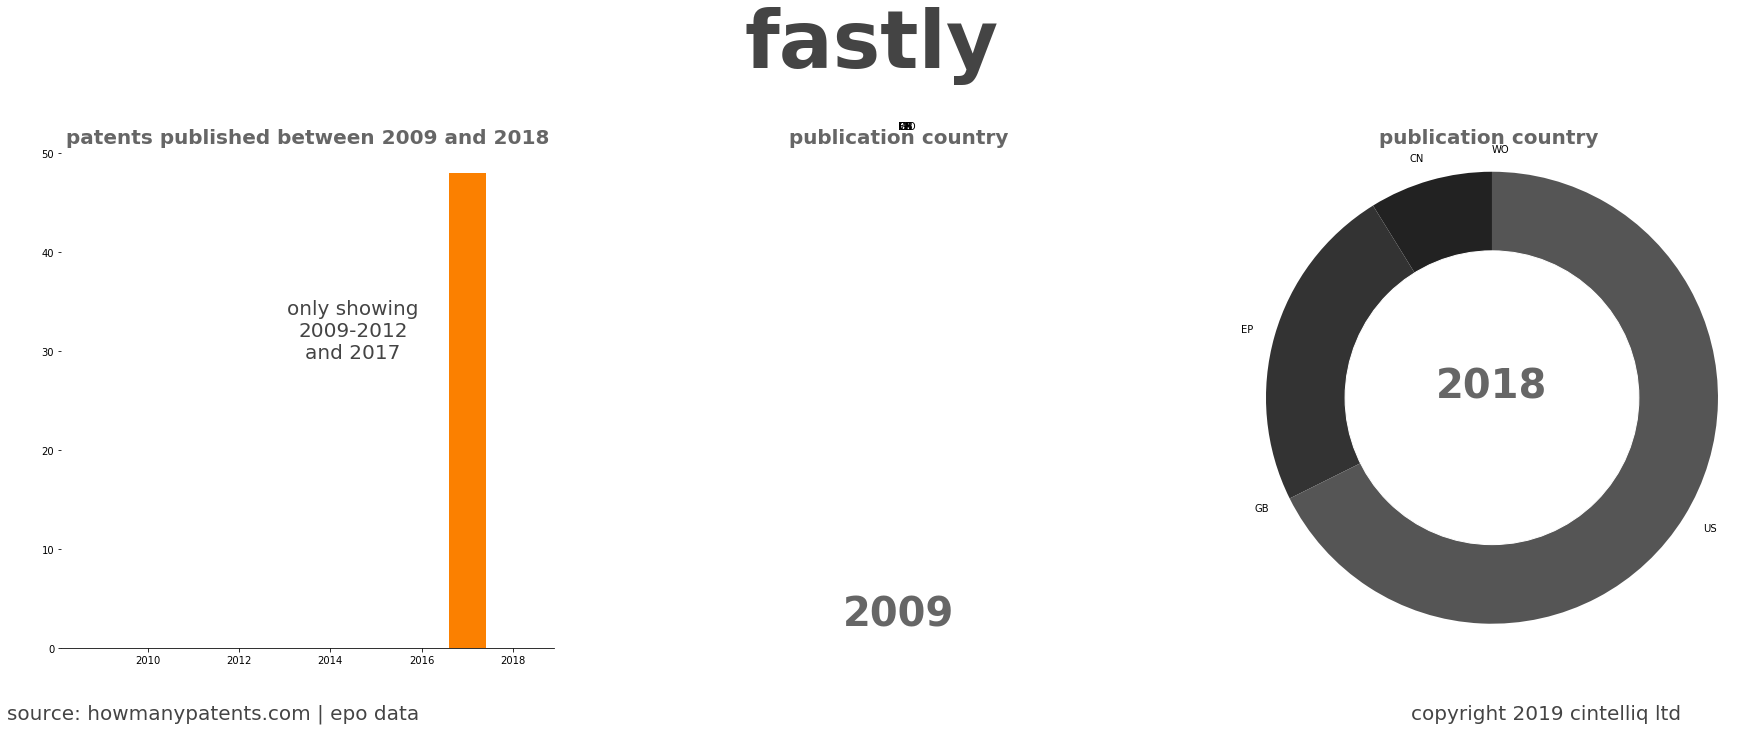 summary of patents for Fastly